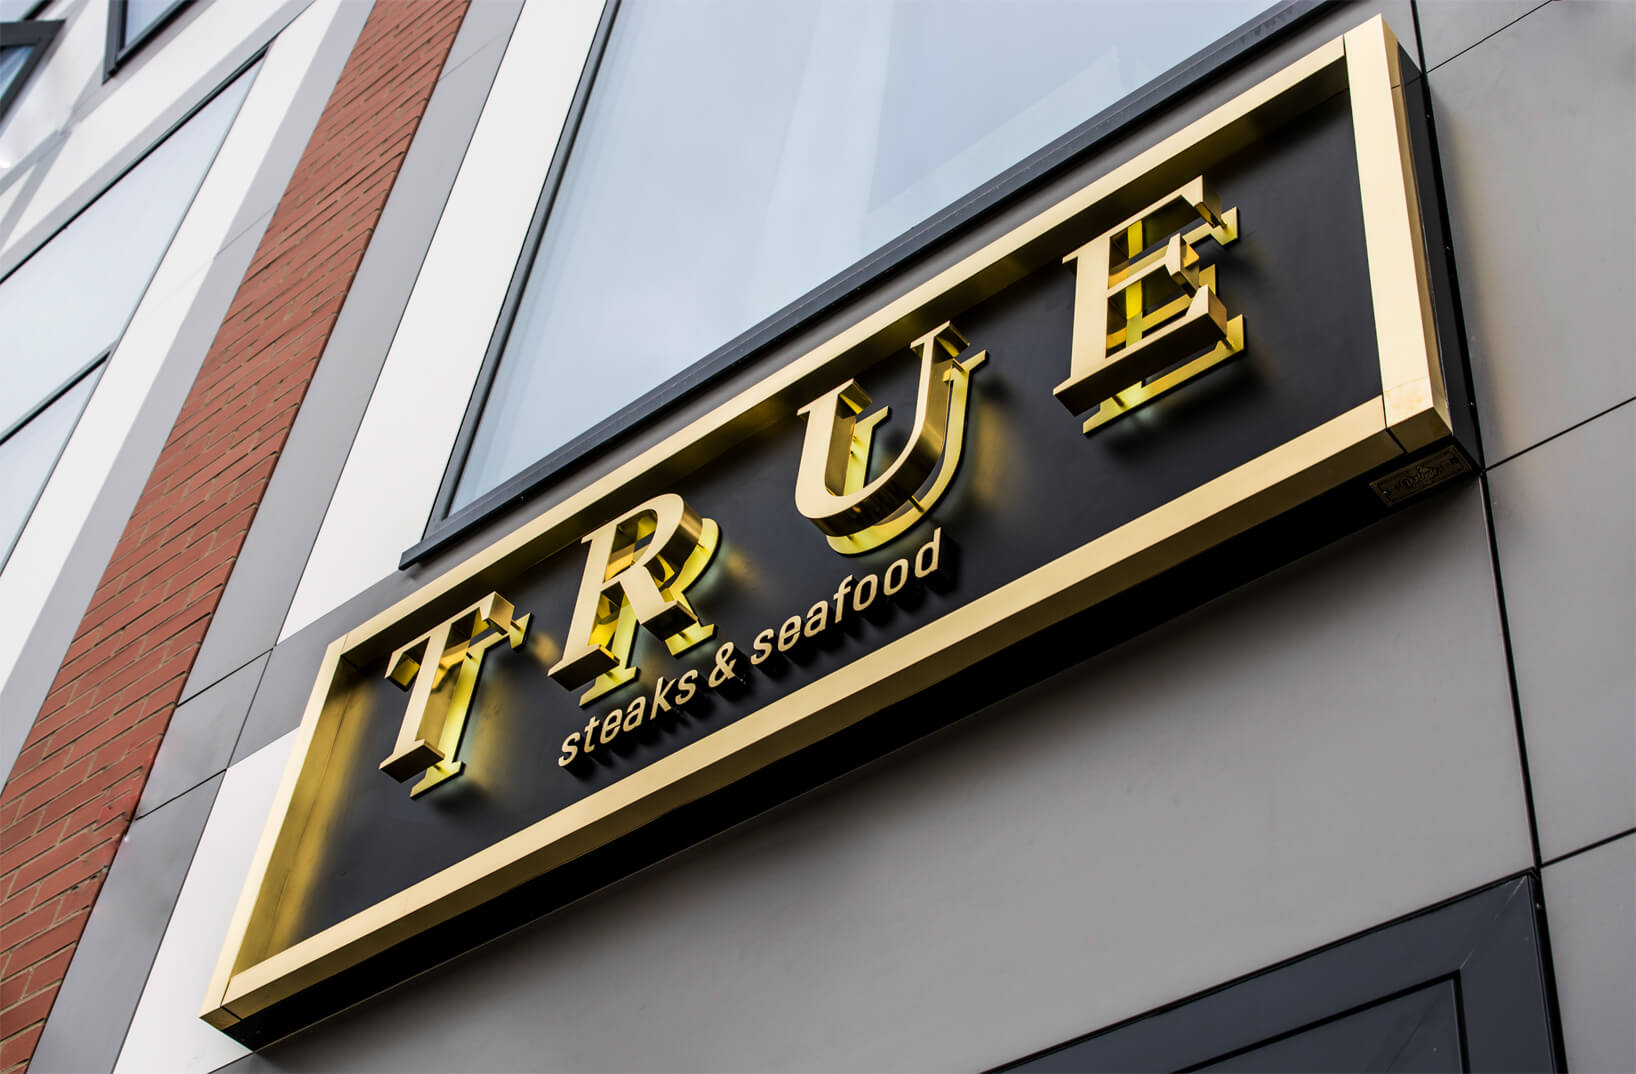 TRUE - True - external sign with golden letters made of stainless steel